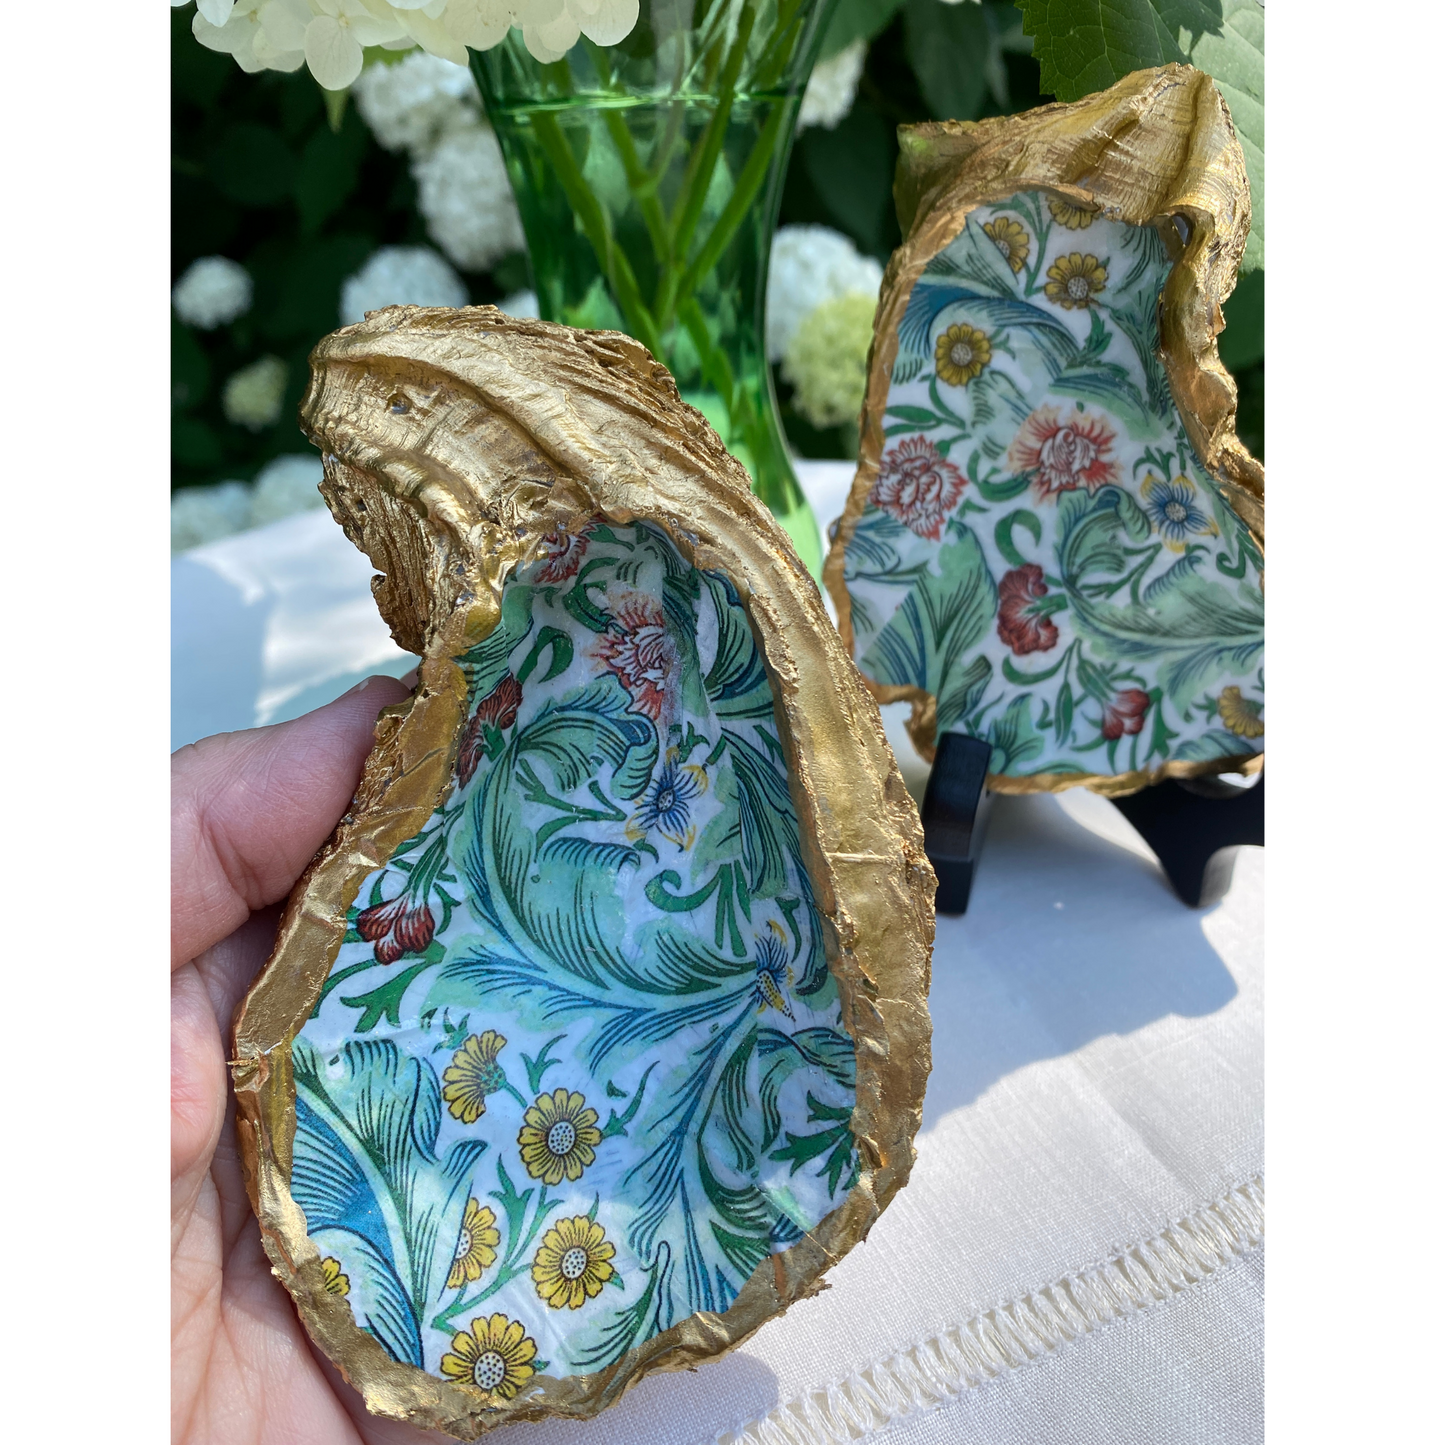 Oyster Shell Art, Vintage William Morris Green with Colorful Flowers, Handcrafted Home Decor